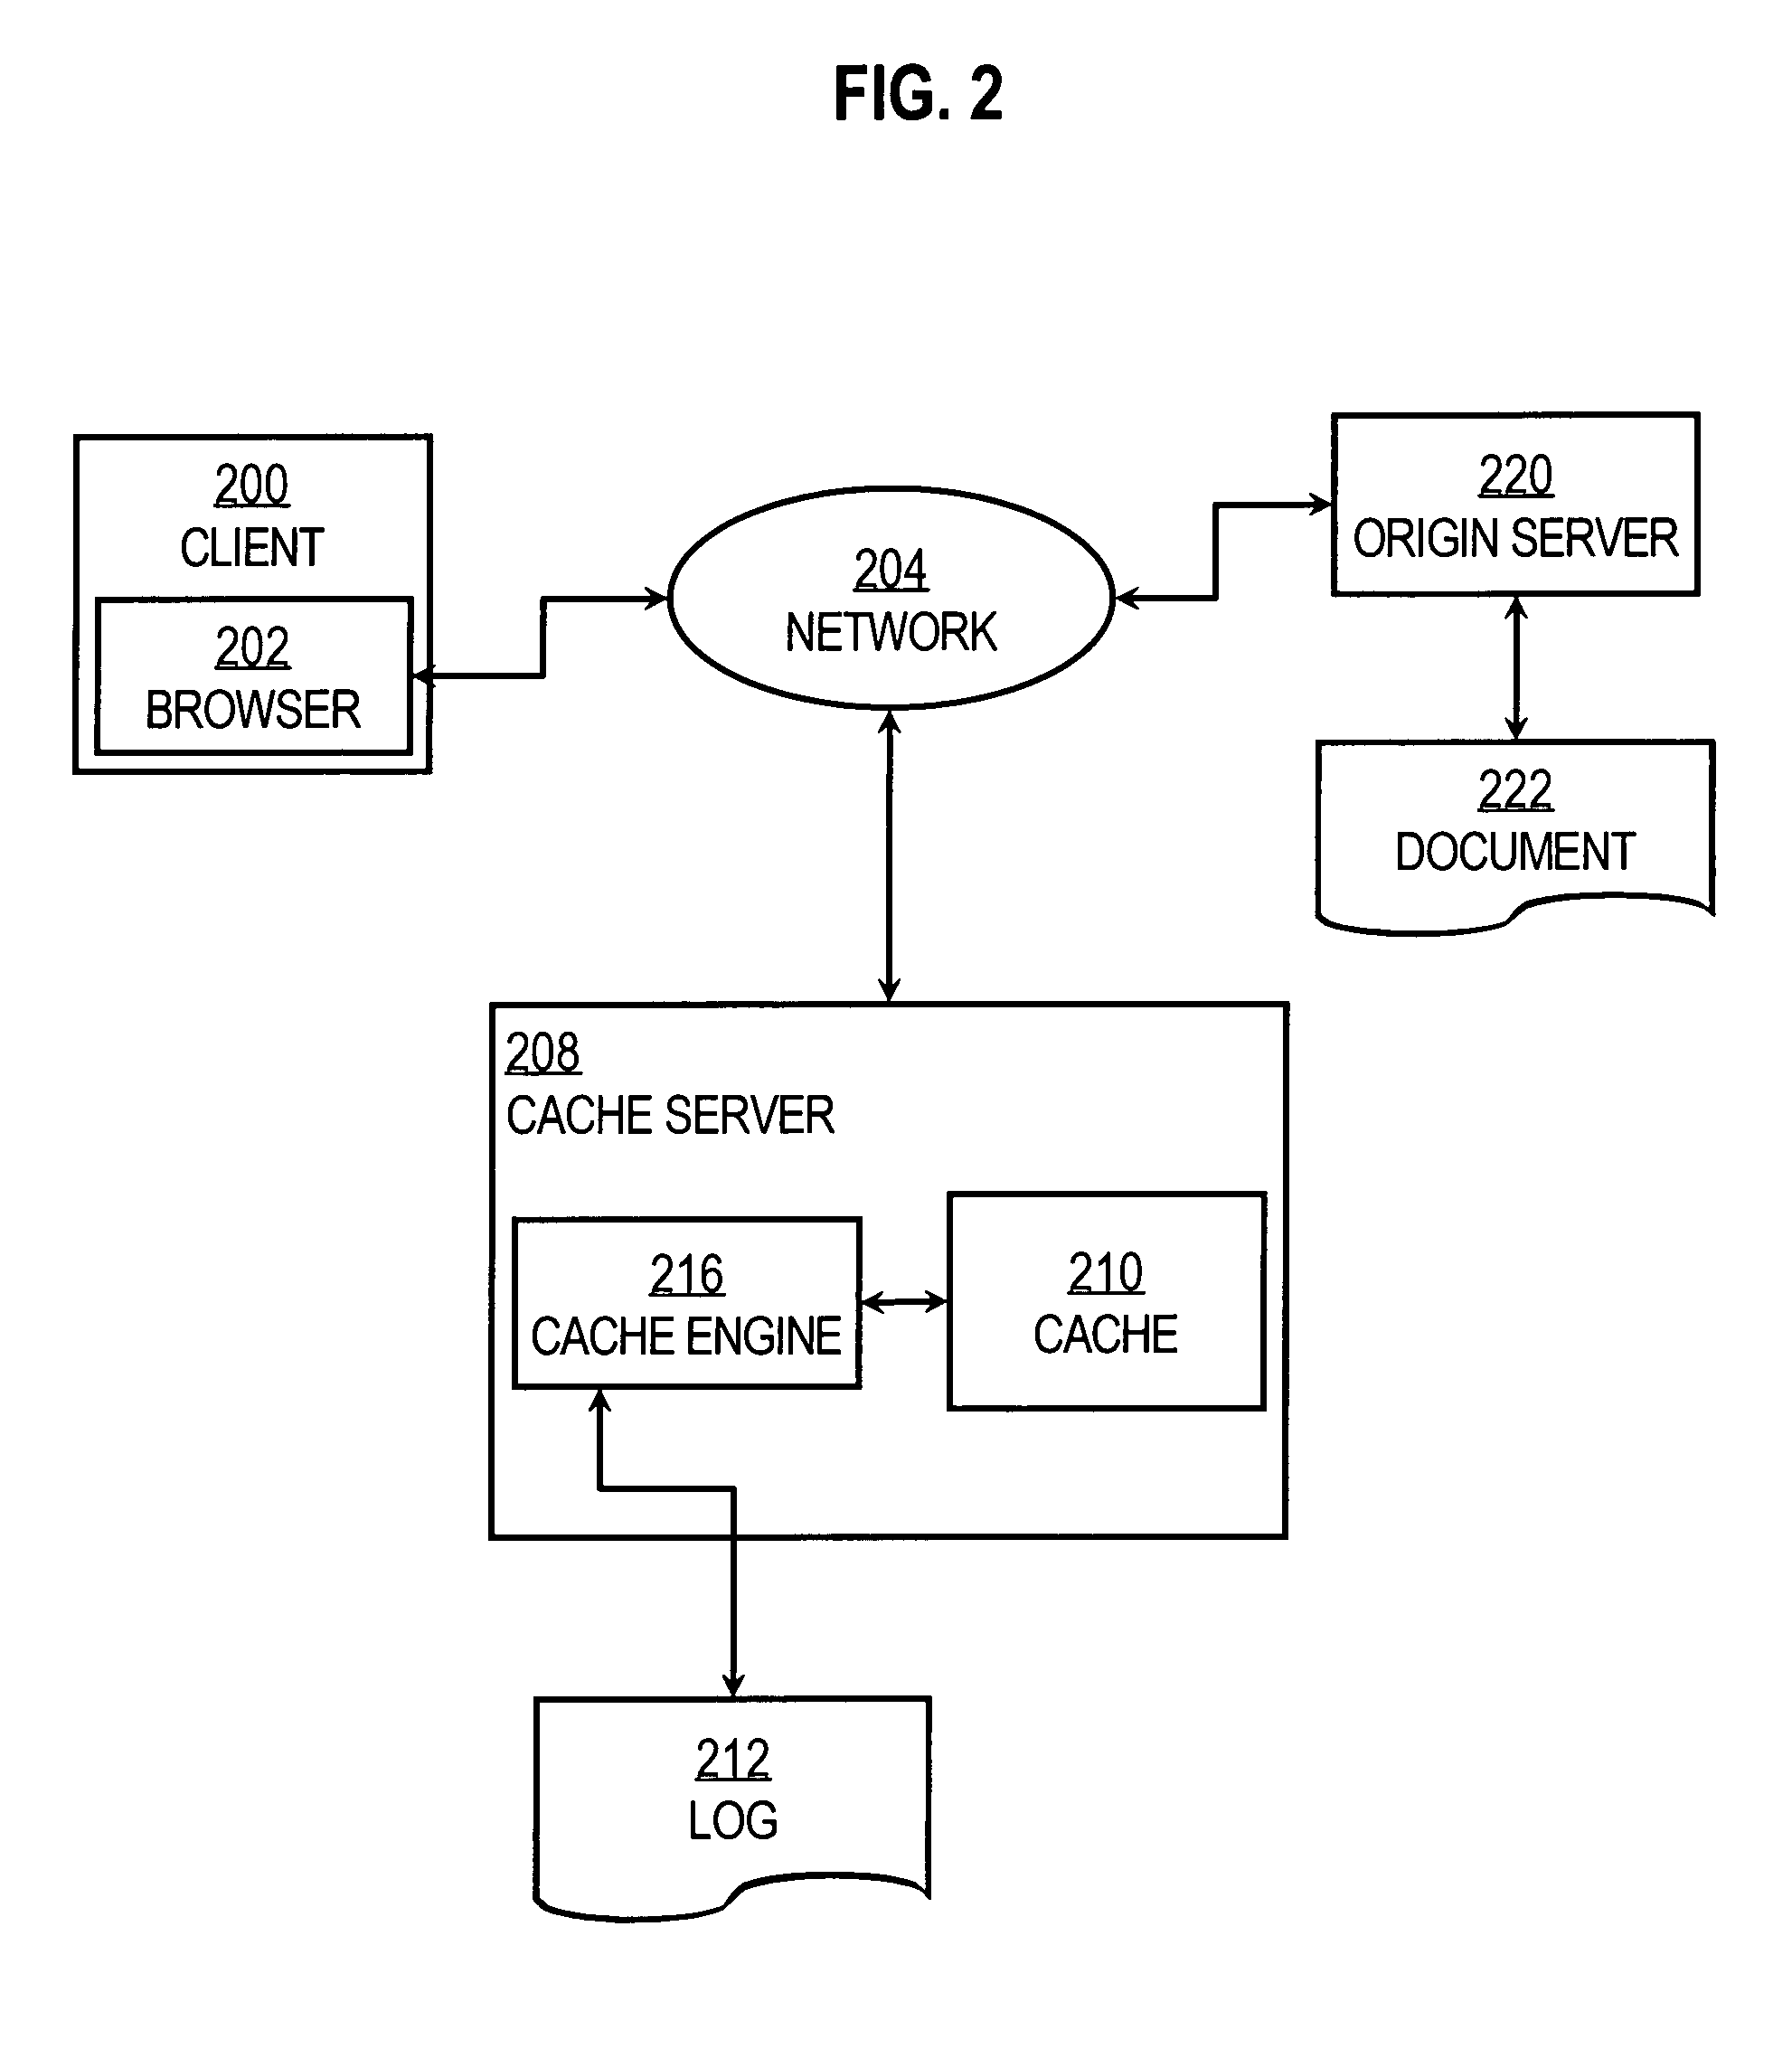 Method and apparatus for measuring similarity among electronic documents